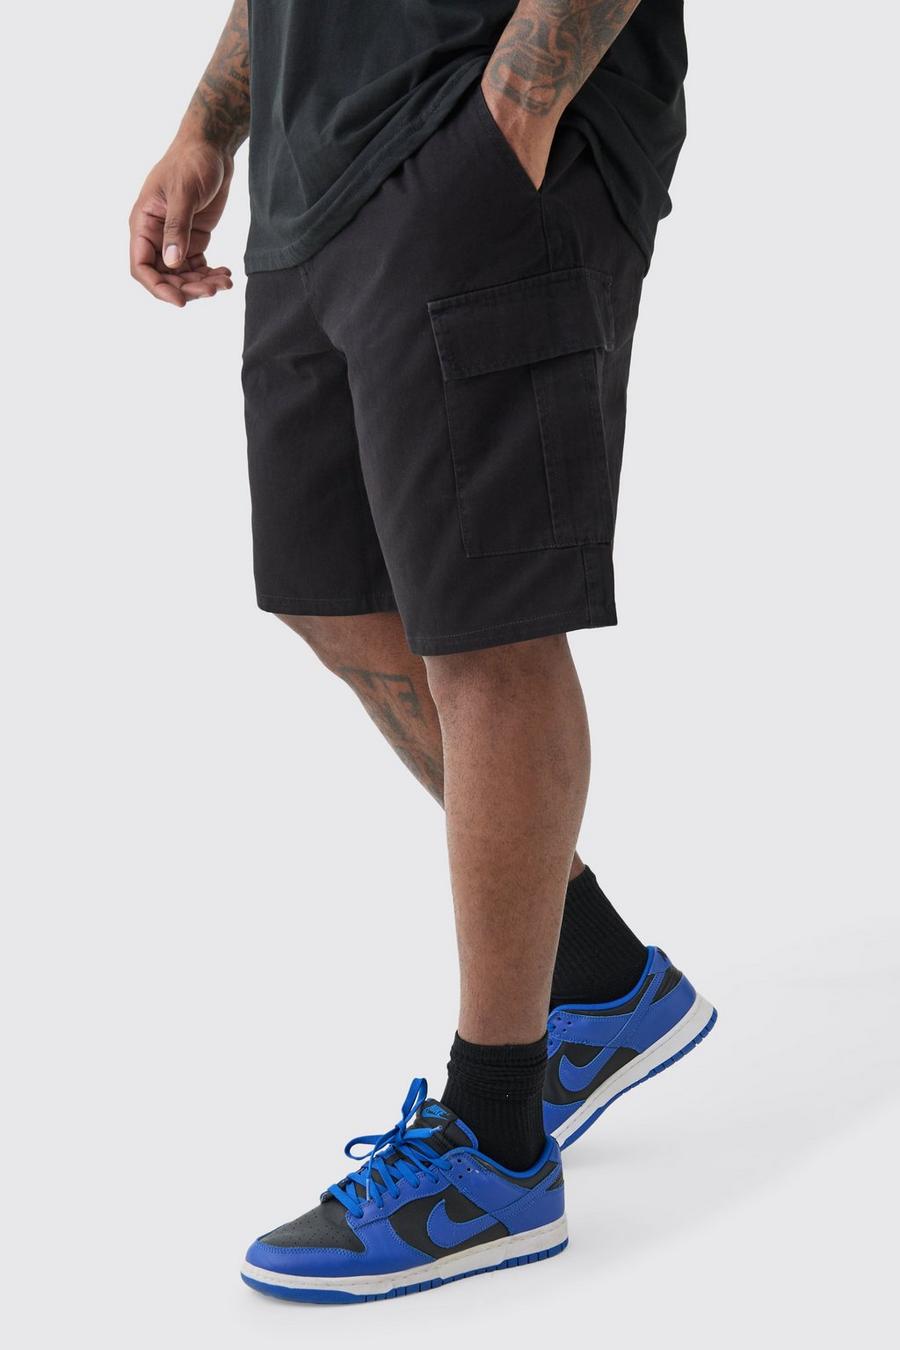 Plus Elastic Waist Black Relaxed Fit Cargo Shorts